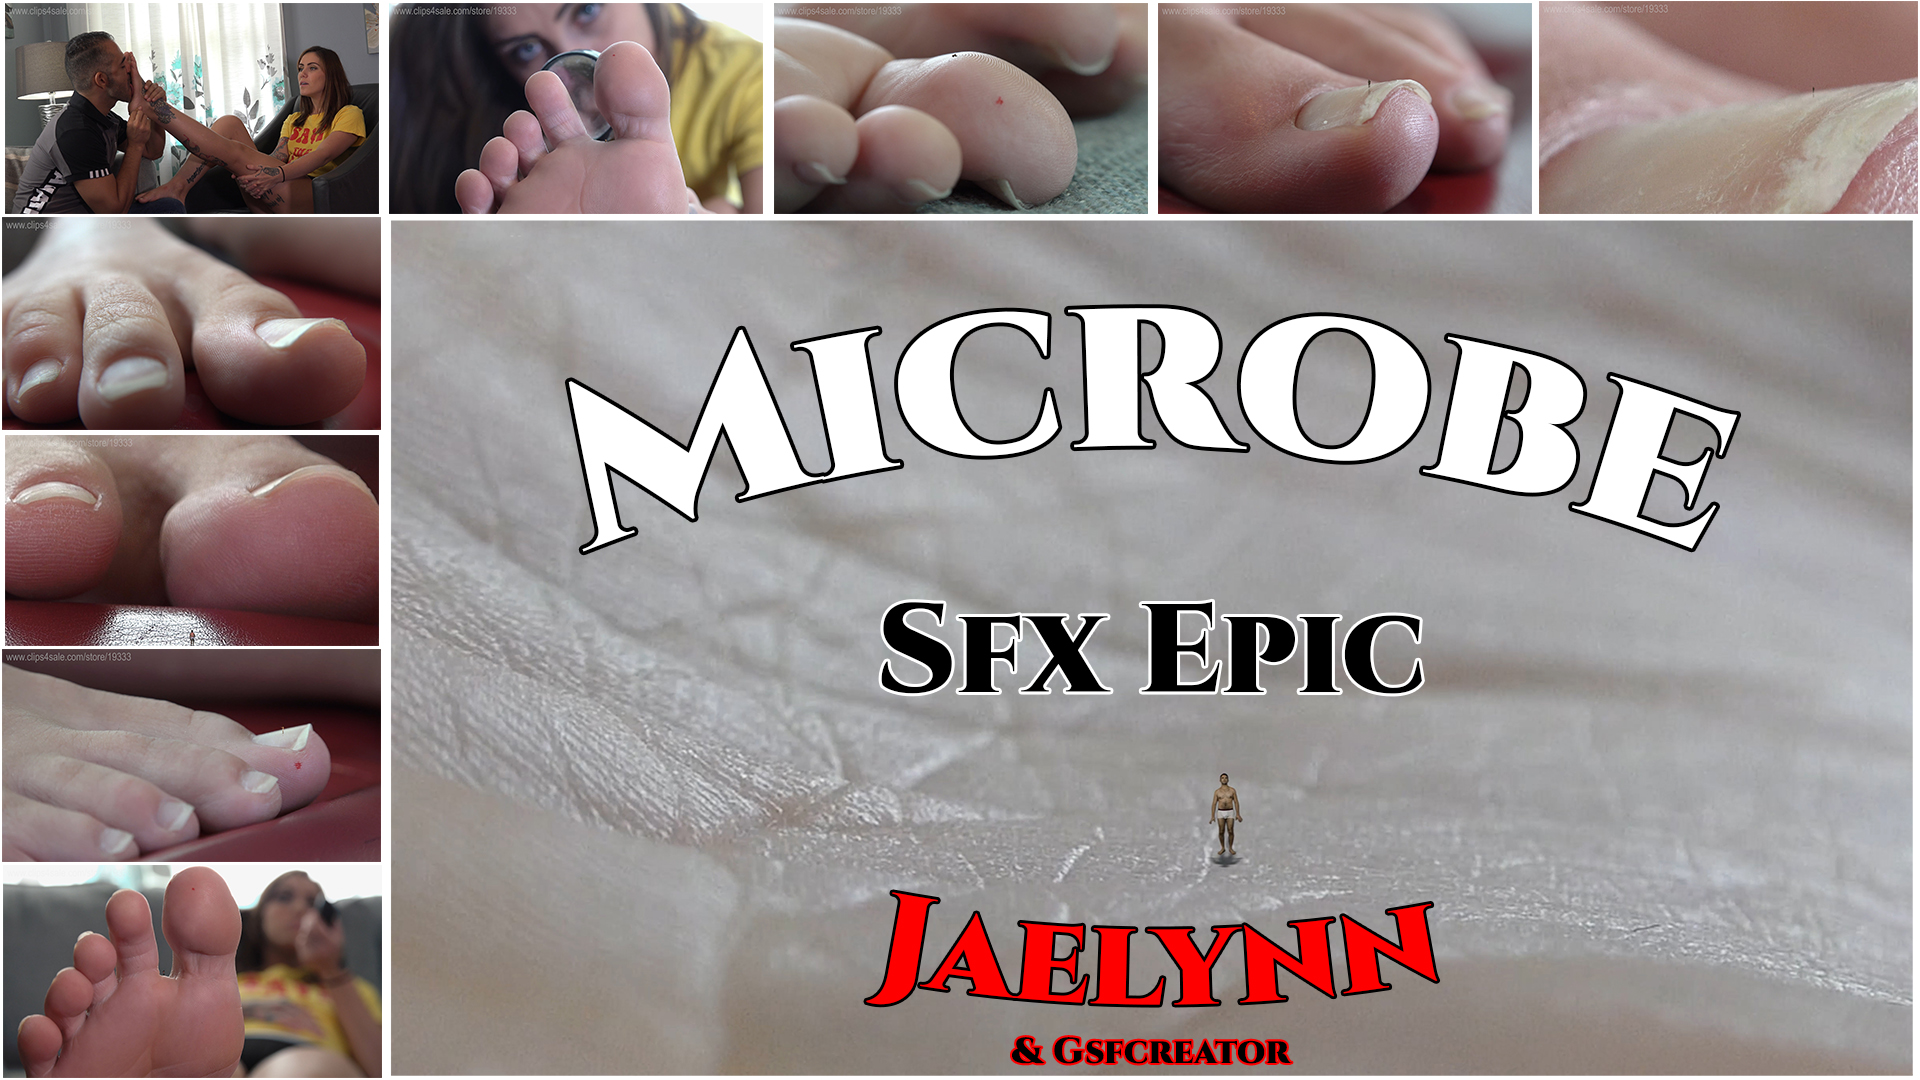 As her devoted boyfriend worship her perfect feet diligently, Jaelynn tries to squeeze a secret out of him. he kept implying for a while that he got a "dark", secret fantasy, but was too embarrassed to share it with her.
<br><br>
Until now. he hesitantly tells him about his ancient shrinking fantasy. his voice almost trembles as he elaborates about being shrunk down into the size of a microbe, roaming all over her enormous feet...and eventually shrinking into nothingness
<br><br>
Jaelynn laughs and takes it very lightly, but her boyfriend is quite serious when he tells her that he is working on something and that one day his fantasy will become a reality.
<br><br>
That day has arrived.
<br><br>
This film is all about a micro-shrinking fantasy, taken to the extreme by someone that had to have his deepest desire come true. this one's for all of the Micro & feet lovers, and got some of the best shots I've ever filmed. prepare to explore the vastness of Jaelynn's flawless, wrinkled desert of soles, and mountains of toes.
<br><br>
Foot worship
<br><br>
shrinking
<br><br>
Ground shakes
<br><br>
unware (into aware)
<br><br>
Pov
<br><br>
Extreme close-ups
<br><br>
soles
<br><br>
toes
<br><br>
toe-climbing
<br><br>
JOI
<br><br>
Cum countdown